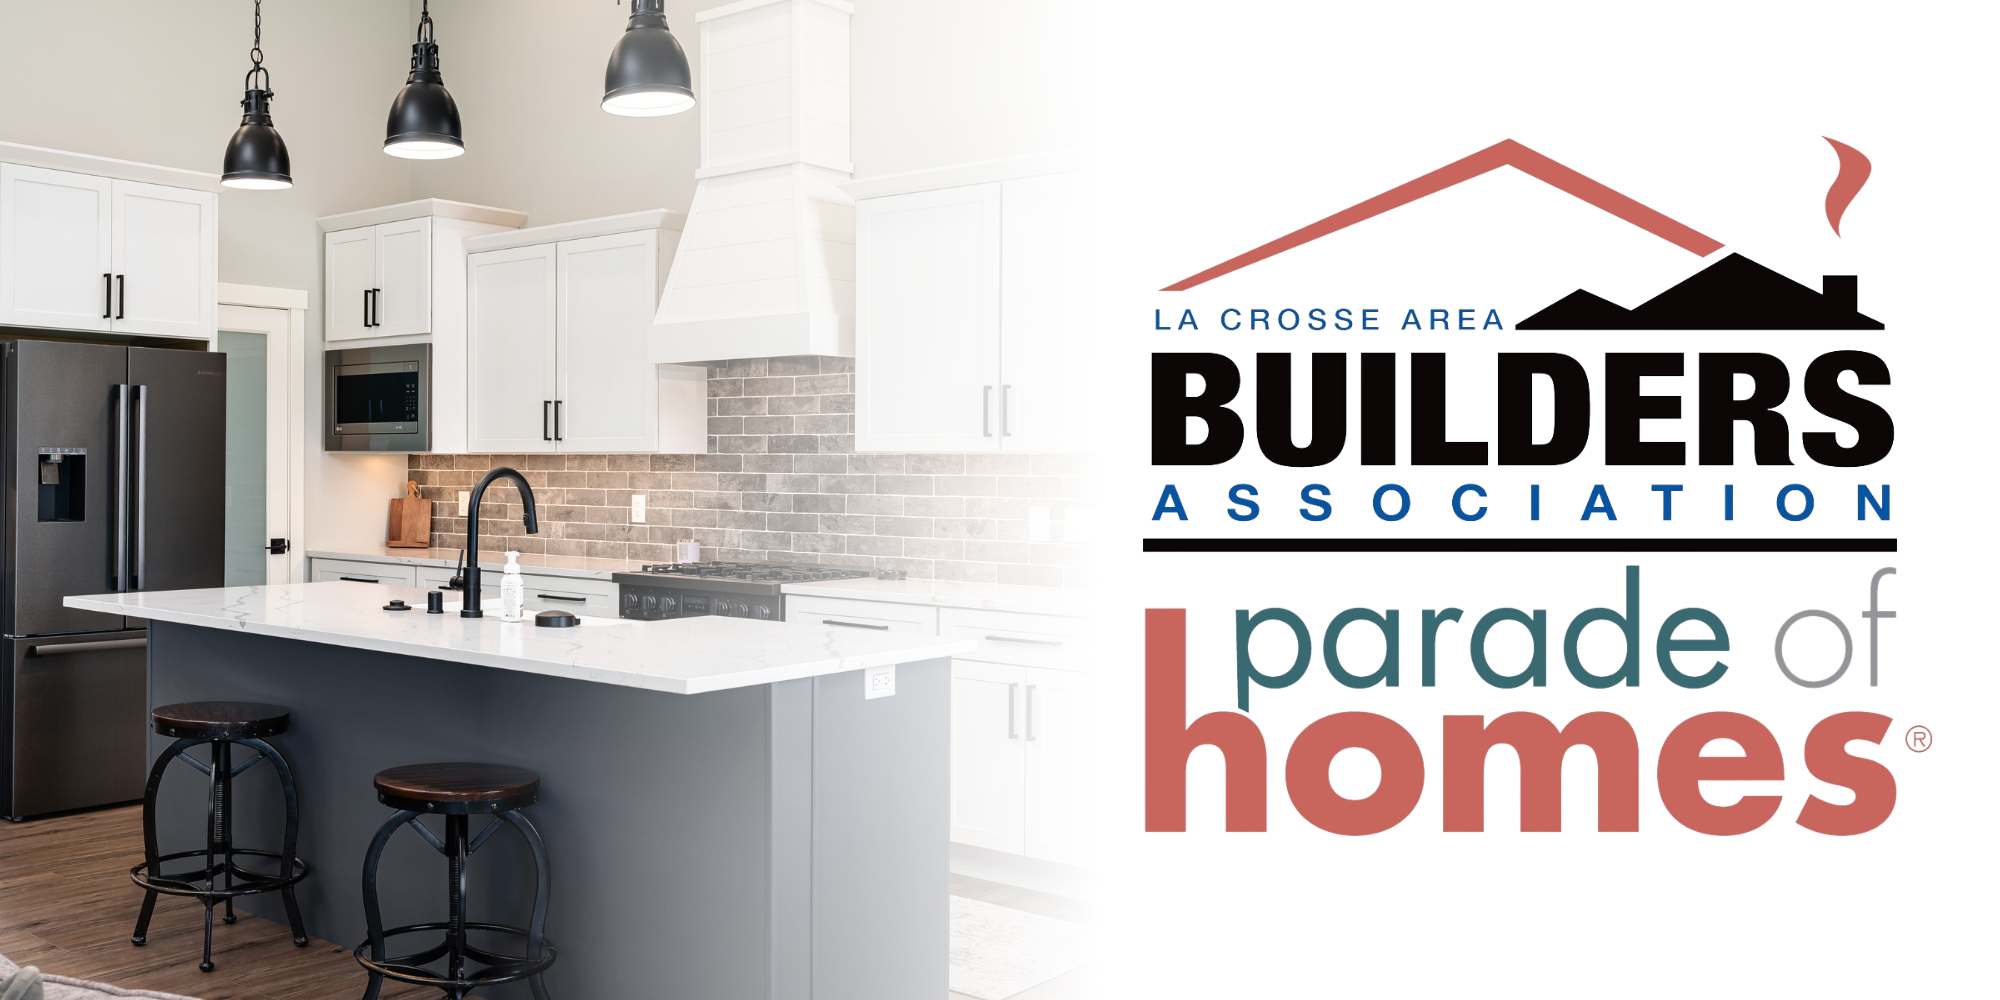 Every summer, tour new and remodeled homes at our Parade of Homes event.